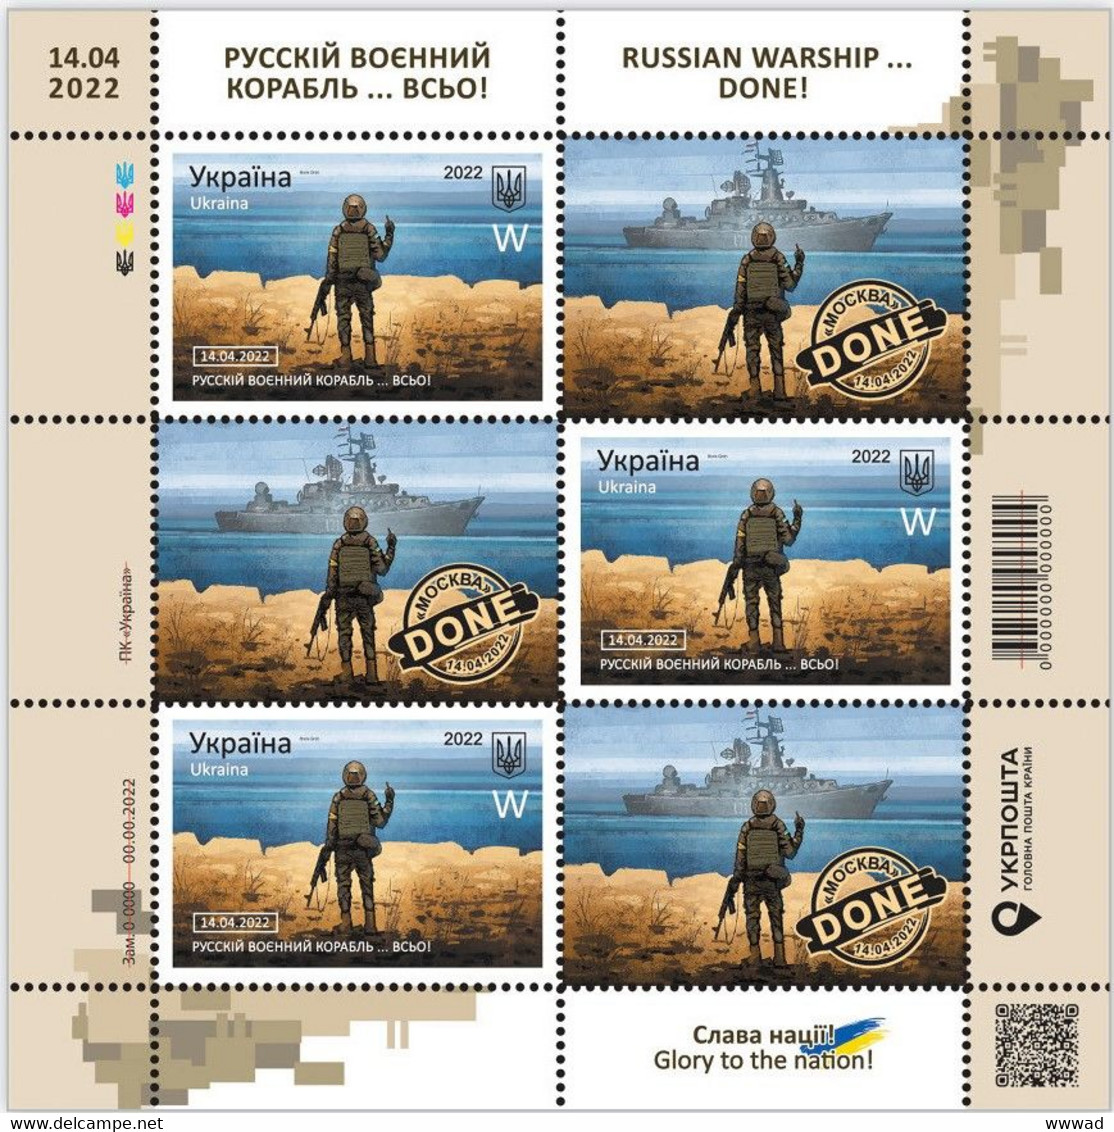 Ukraine War 2022 " Russian Warship ... DONE! Glory To The Nation! ”. Russian Invasion "W" Sheet MNH !second Issue! - Ukraine